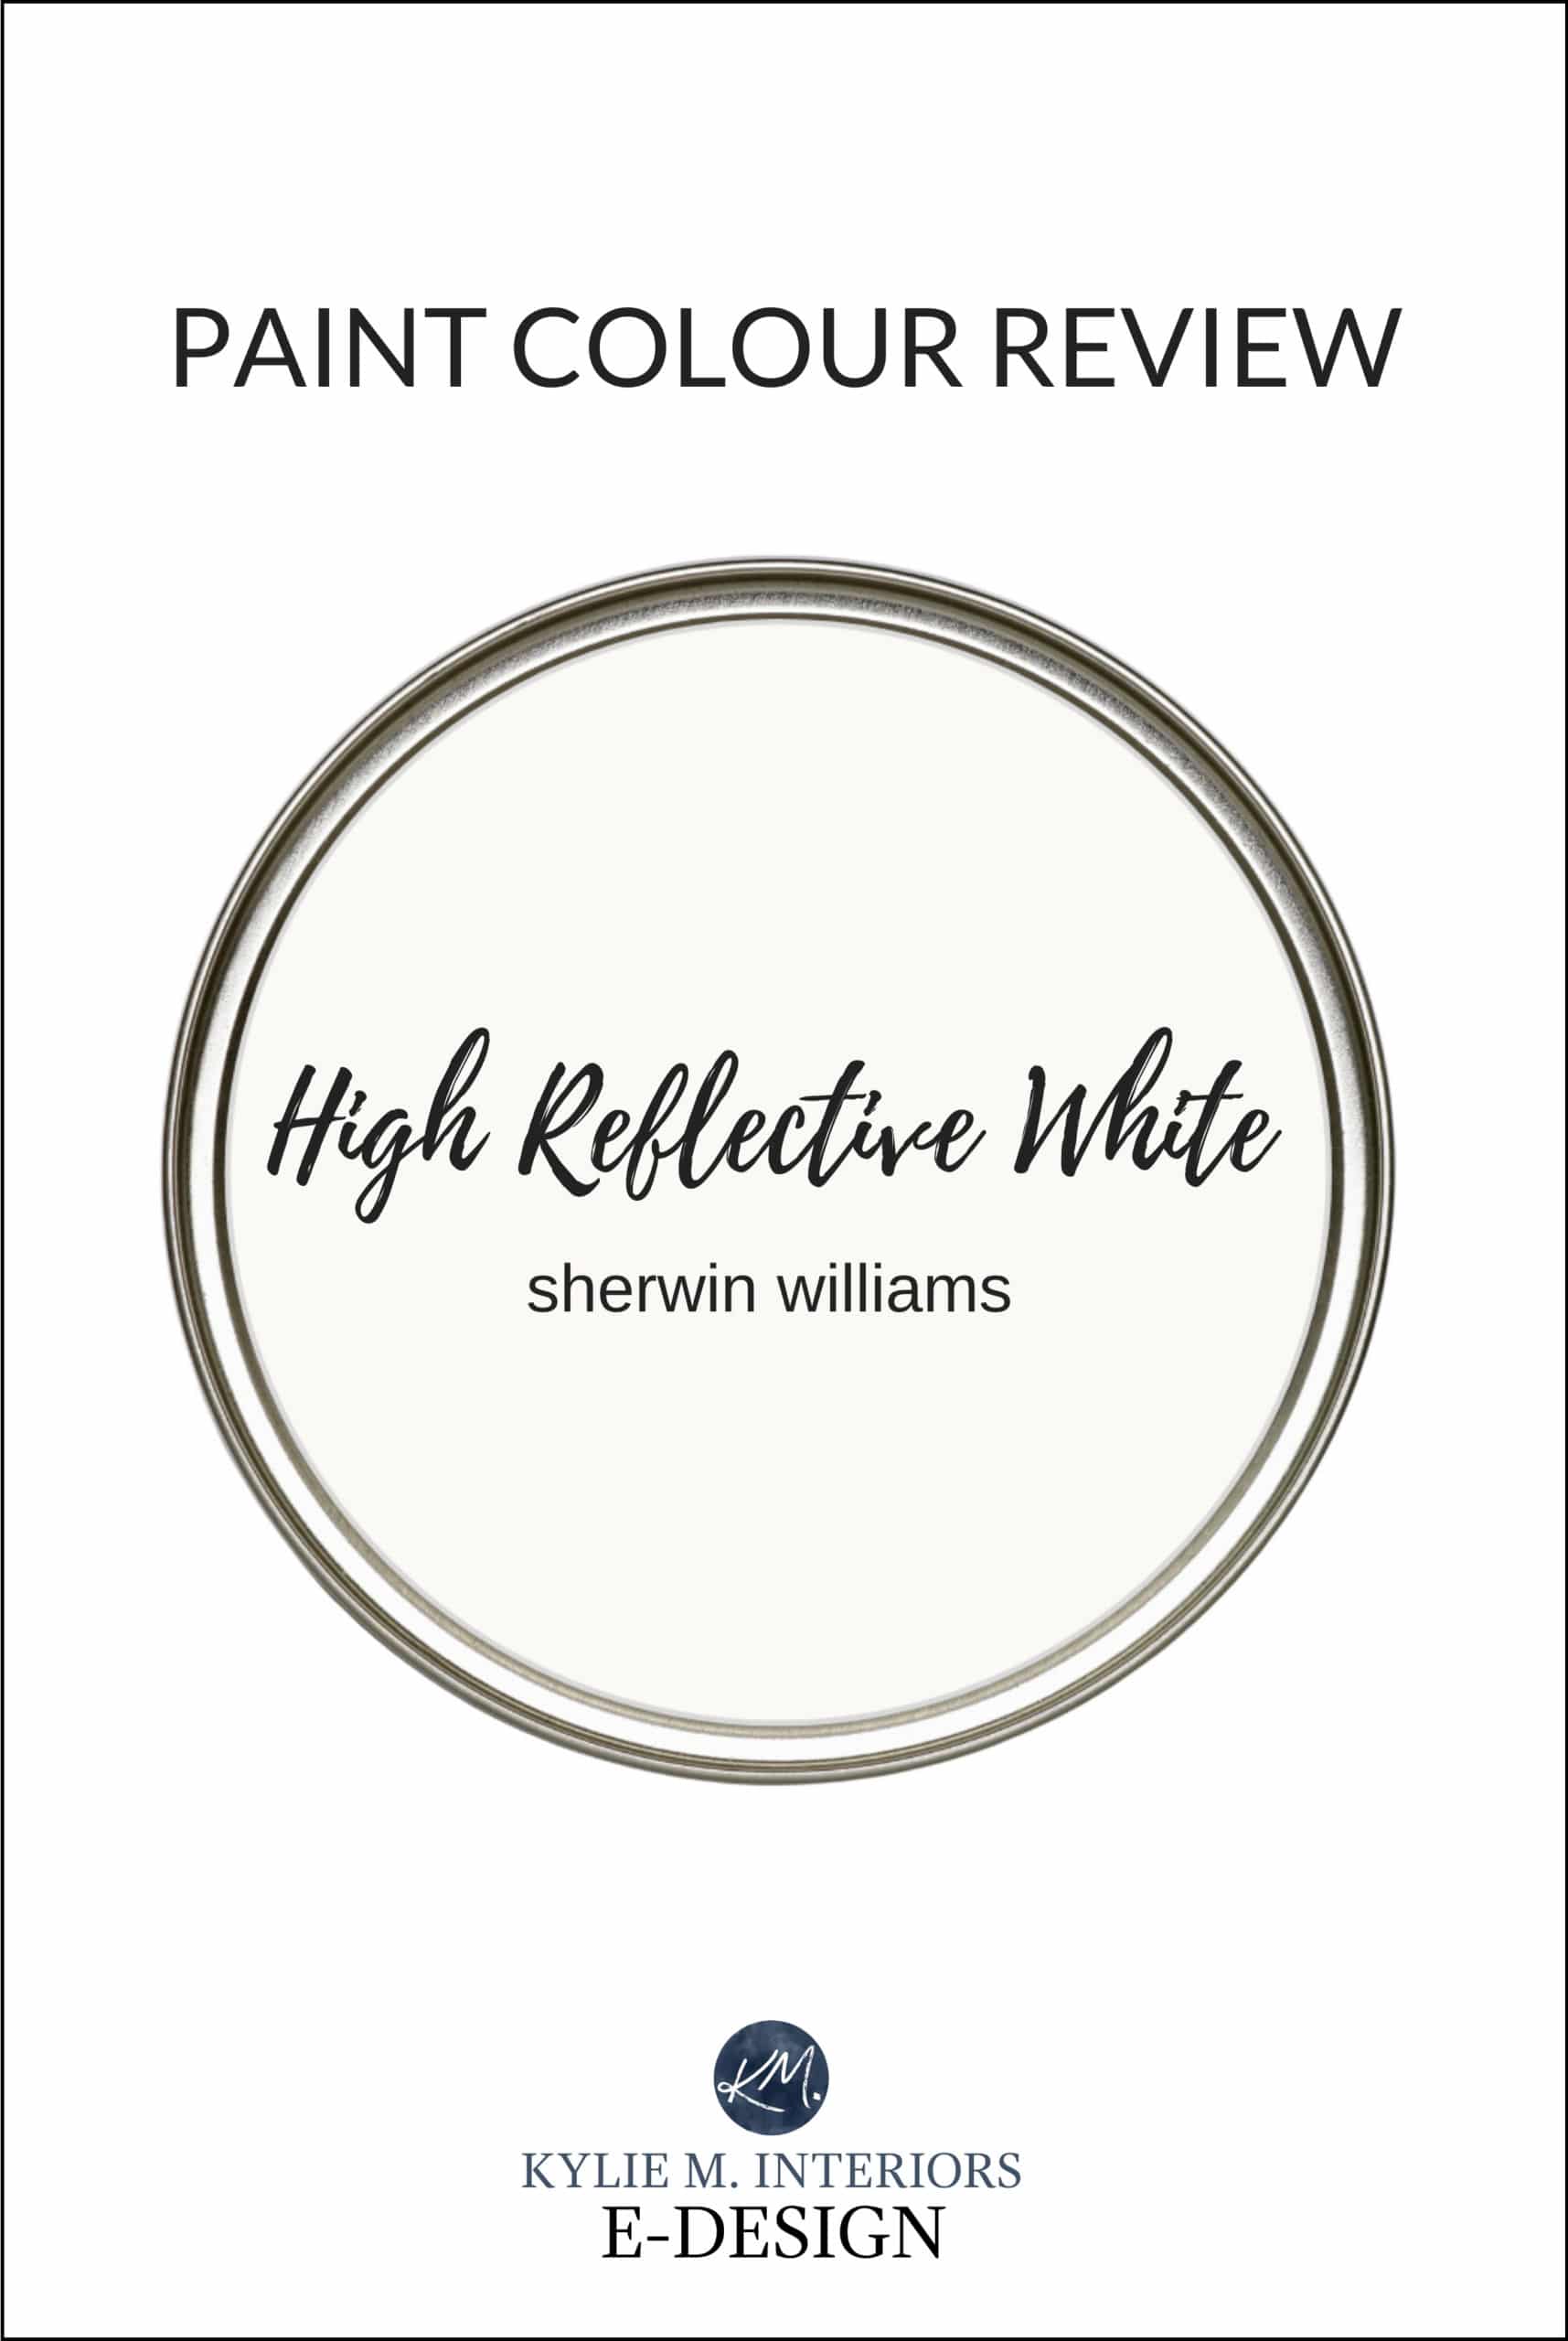 Paint colour review of the best super white paint colour, Sherwin Williams High Reflective White. Undertones and more. Kylie M Interiors Edesign, online paint color consultant and edesign expert